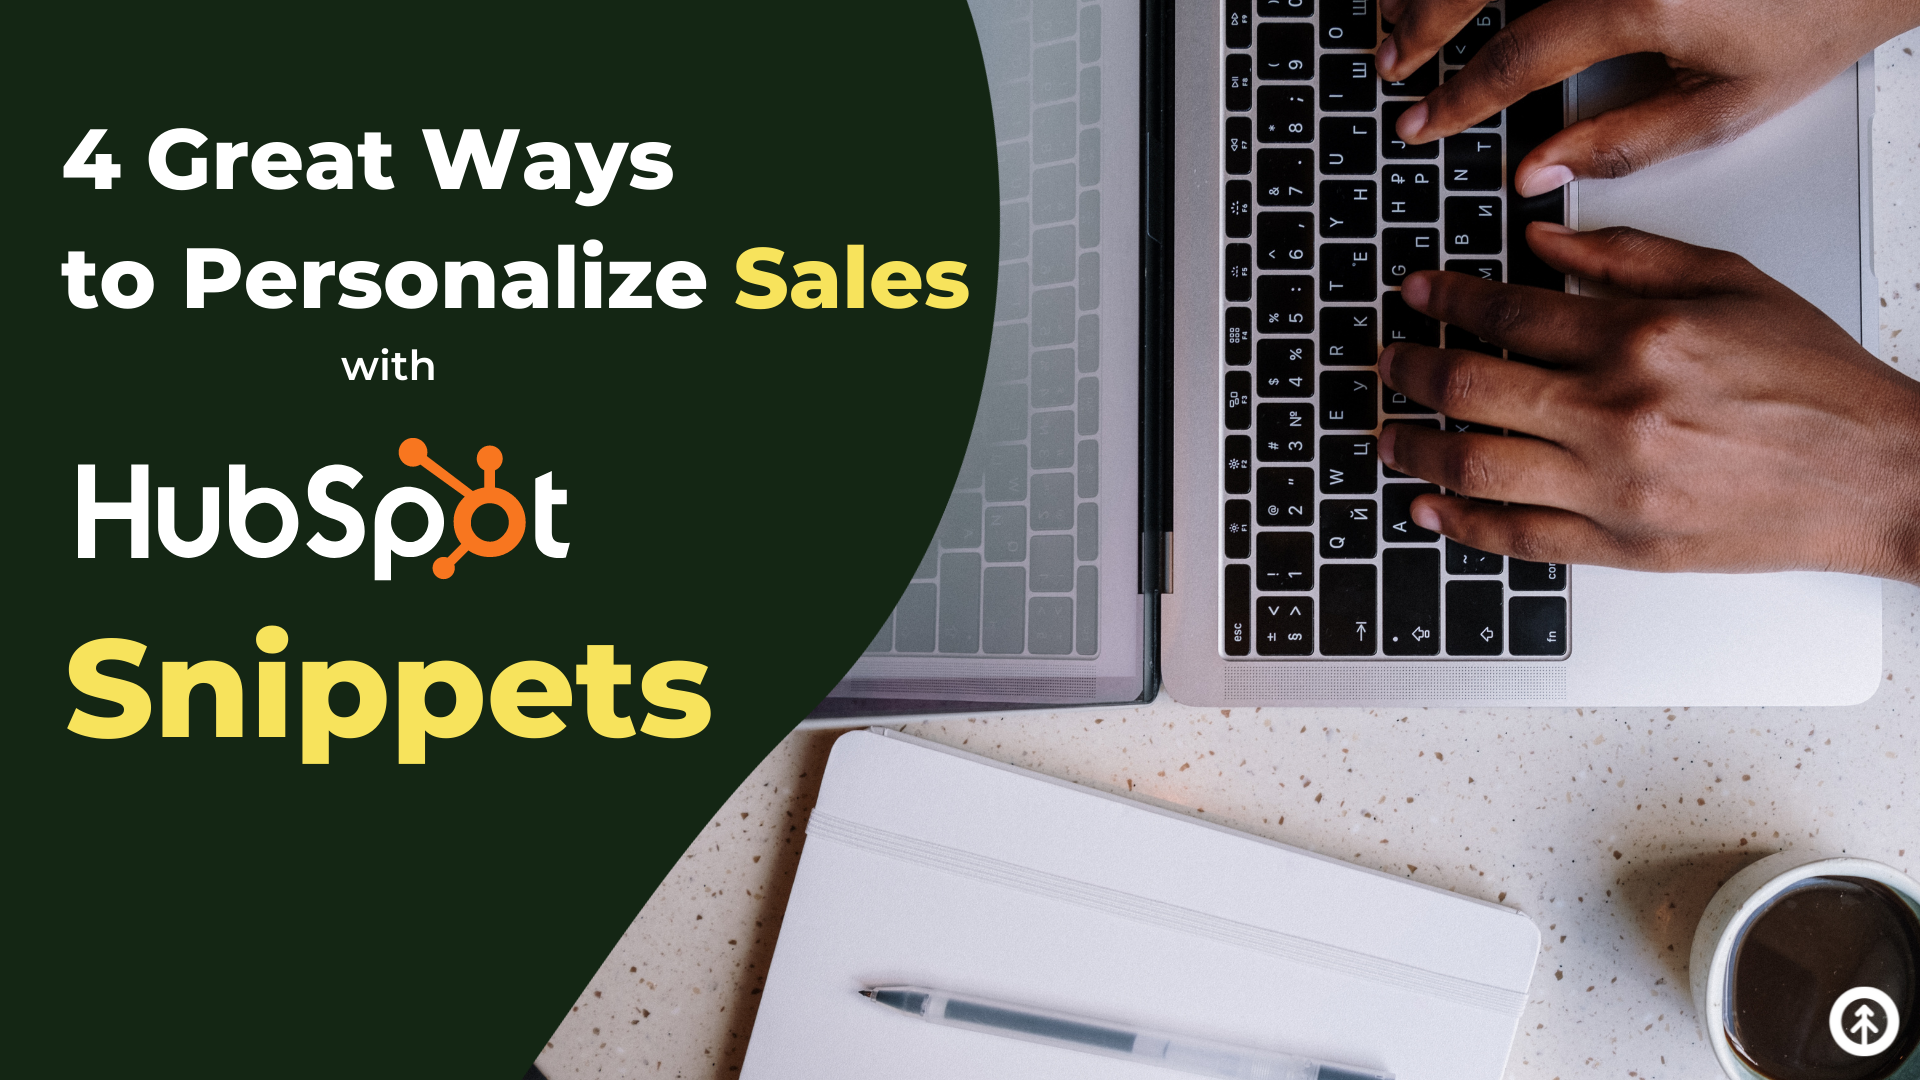 4 Great Ways to Personalize Sales with HubSpot Snippets